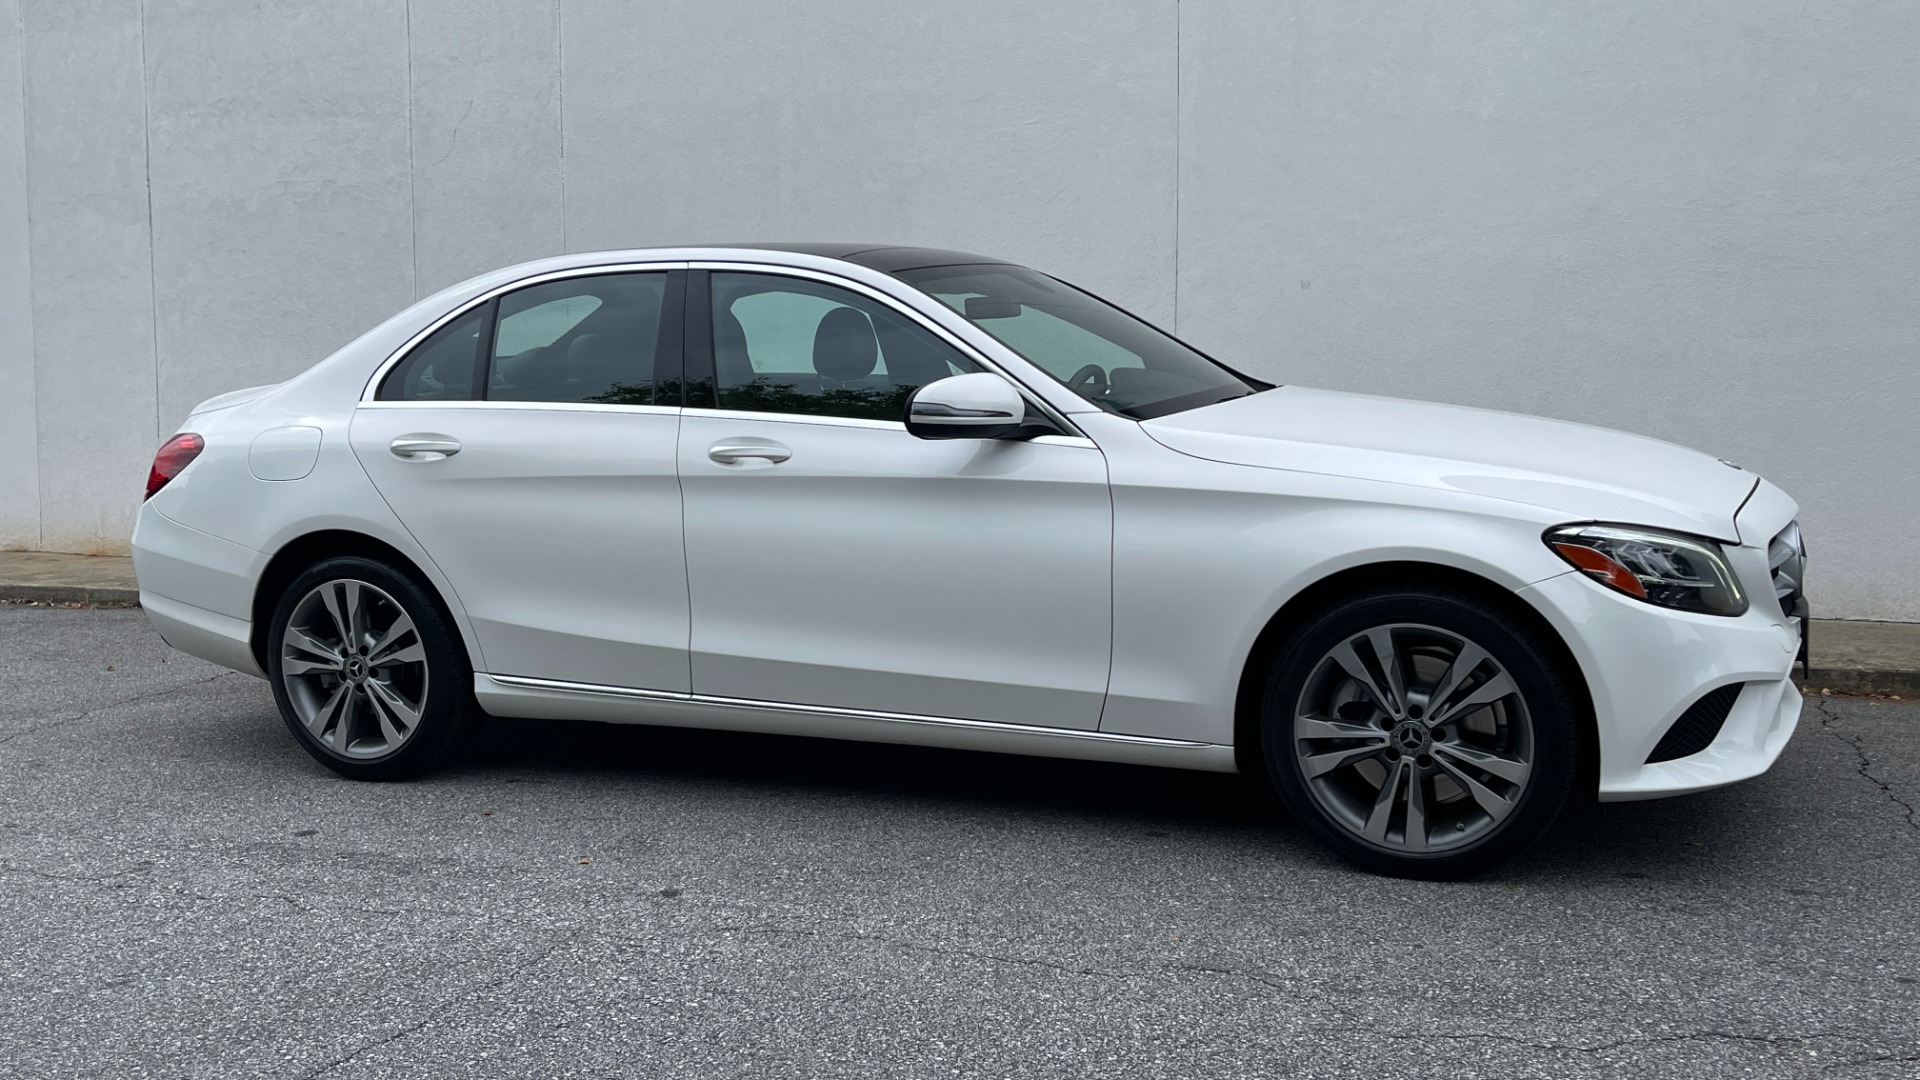 Used 2019 Mercedes-Benz C-Class C300 / PANORAMIC ROOF / BURMESTER / BLIND SPOT / HEATED STEERING AND SEATS for sale $34,995 at Formula Imports in Charlotte NC 28227 2